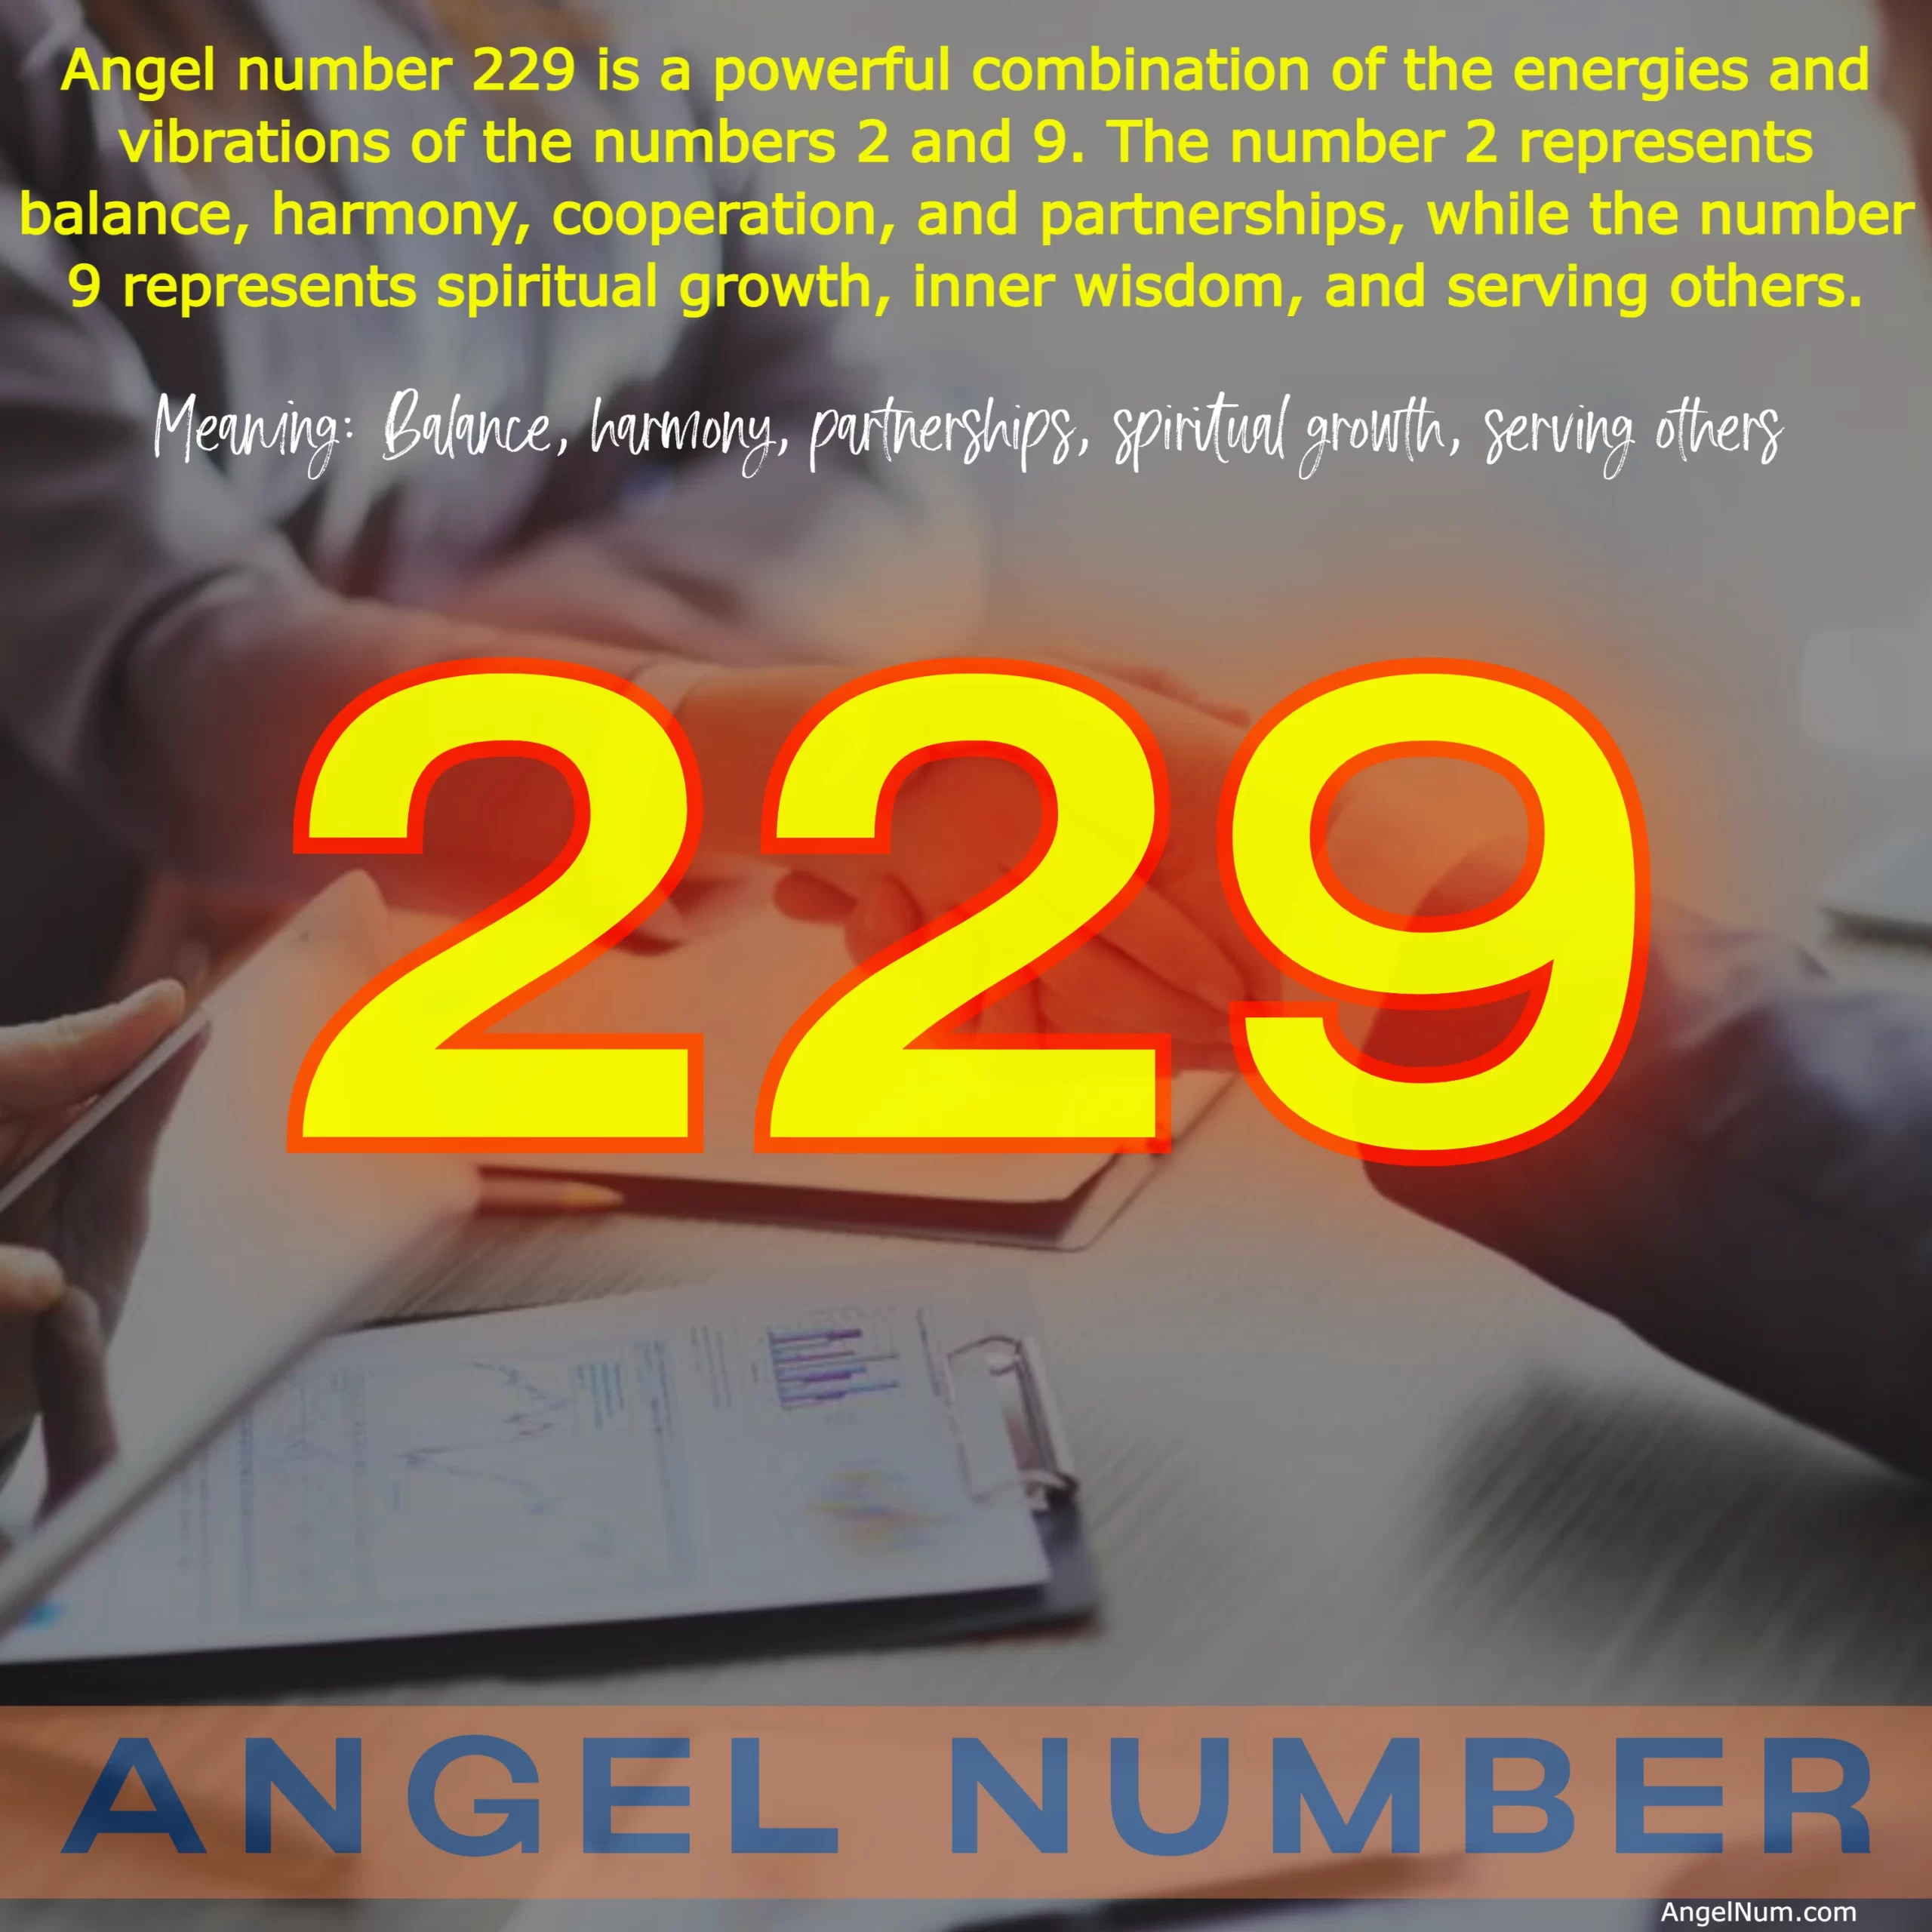 Angel Number 229: Meaning, Symbolism, and Significance